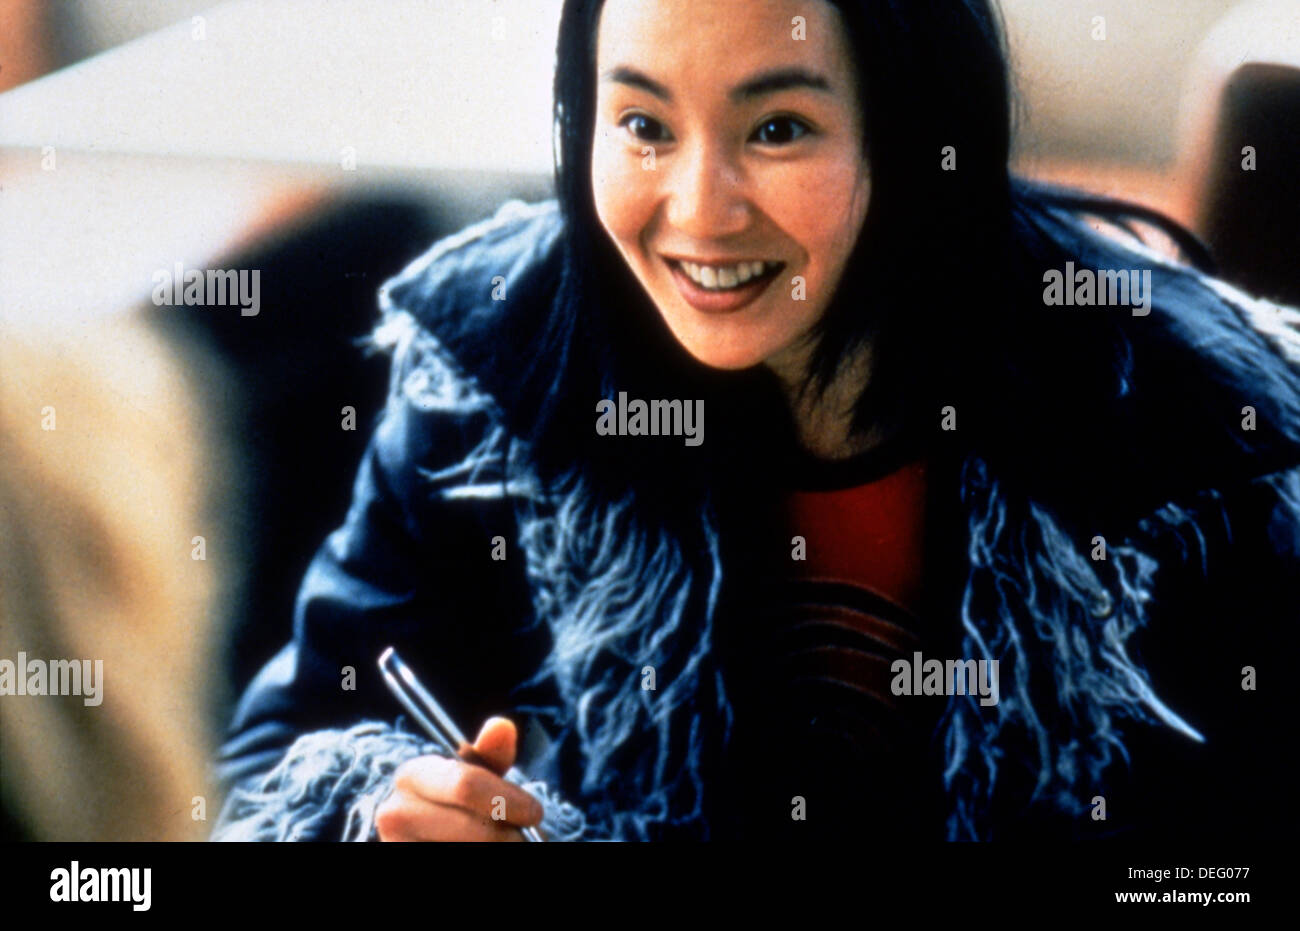 Why I love Maggie Cheung's performance in Irma Vep